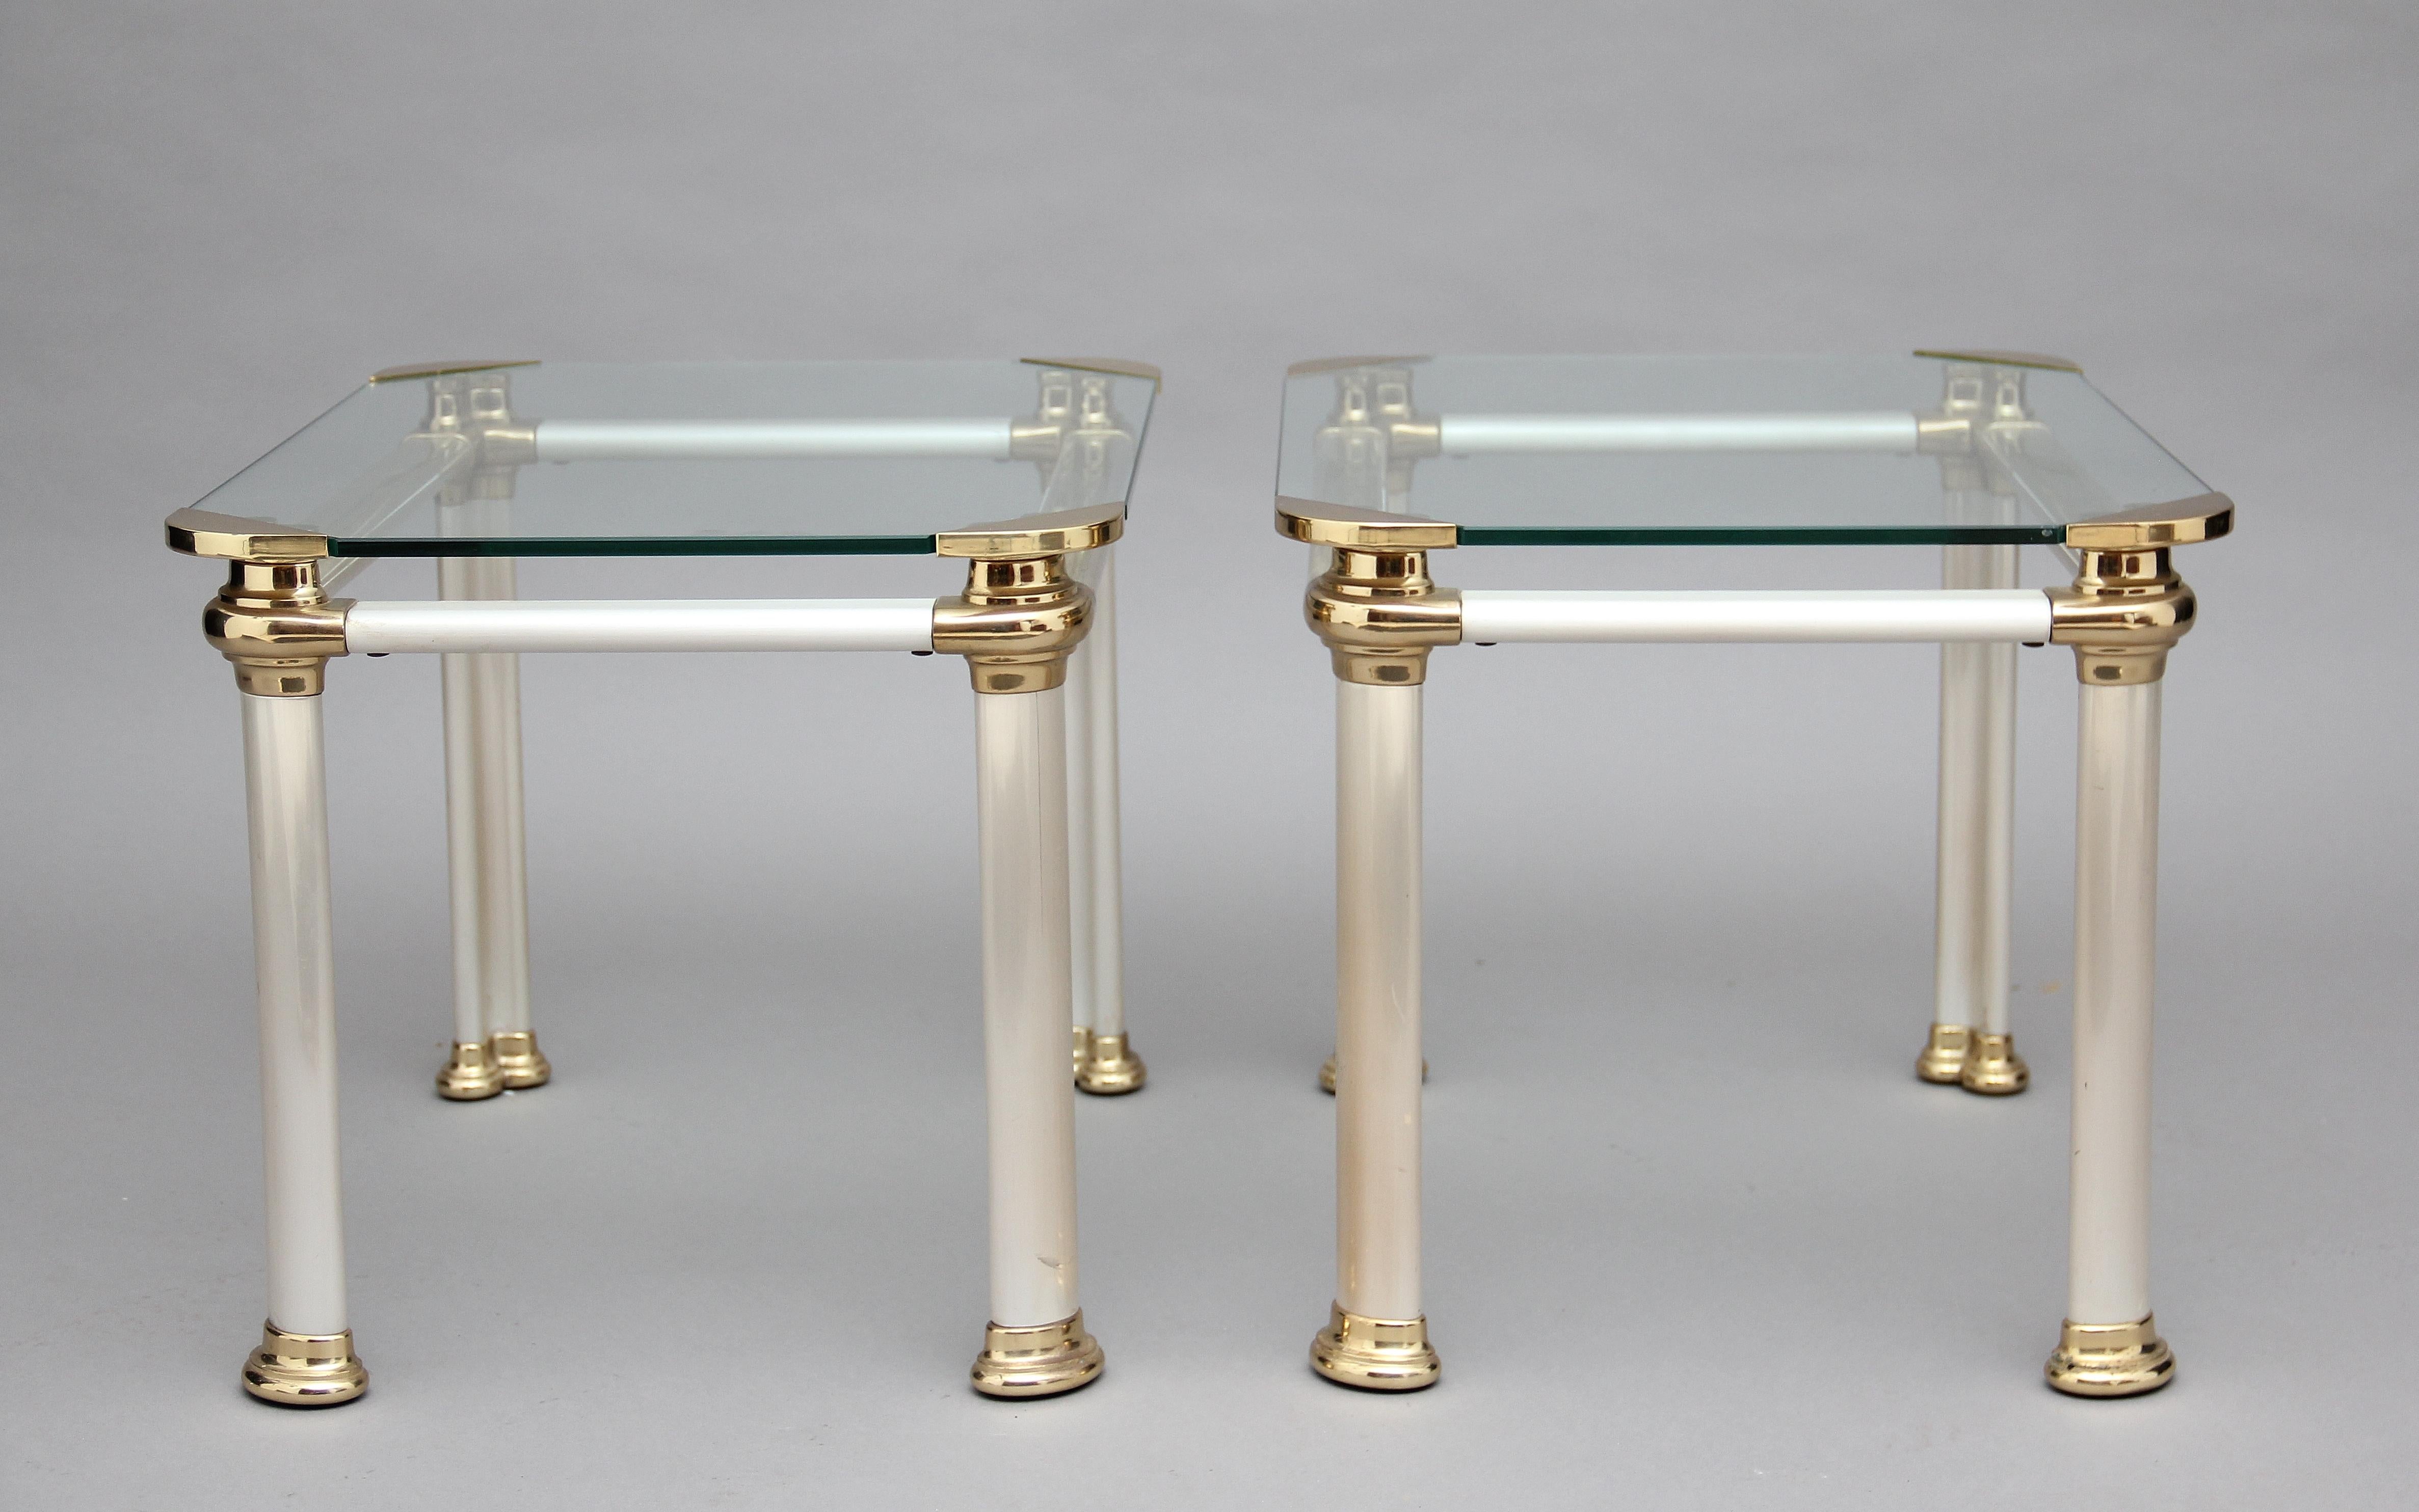 A decorative pair of mid-20th Century Italian brushed steel, brass and glass occasional tables, having a glass top with decorative brass corners, a brushed steel frame with four oval legs ending on brass caps. Lovely quality and in excellent